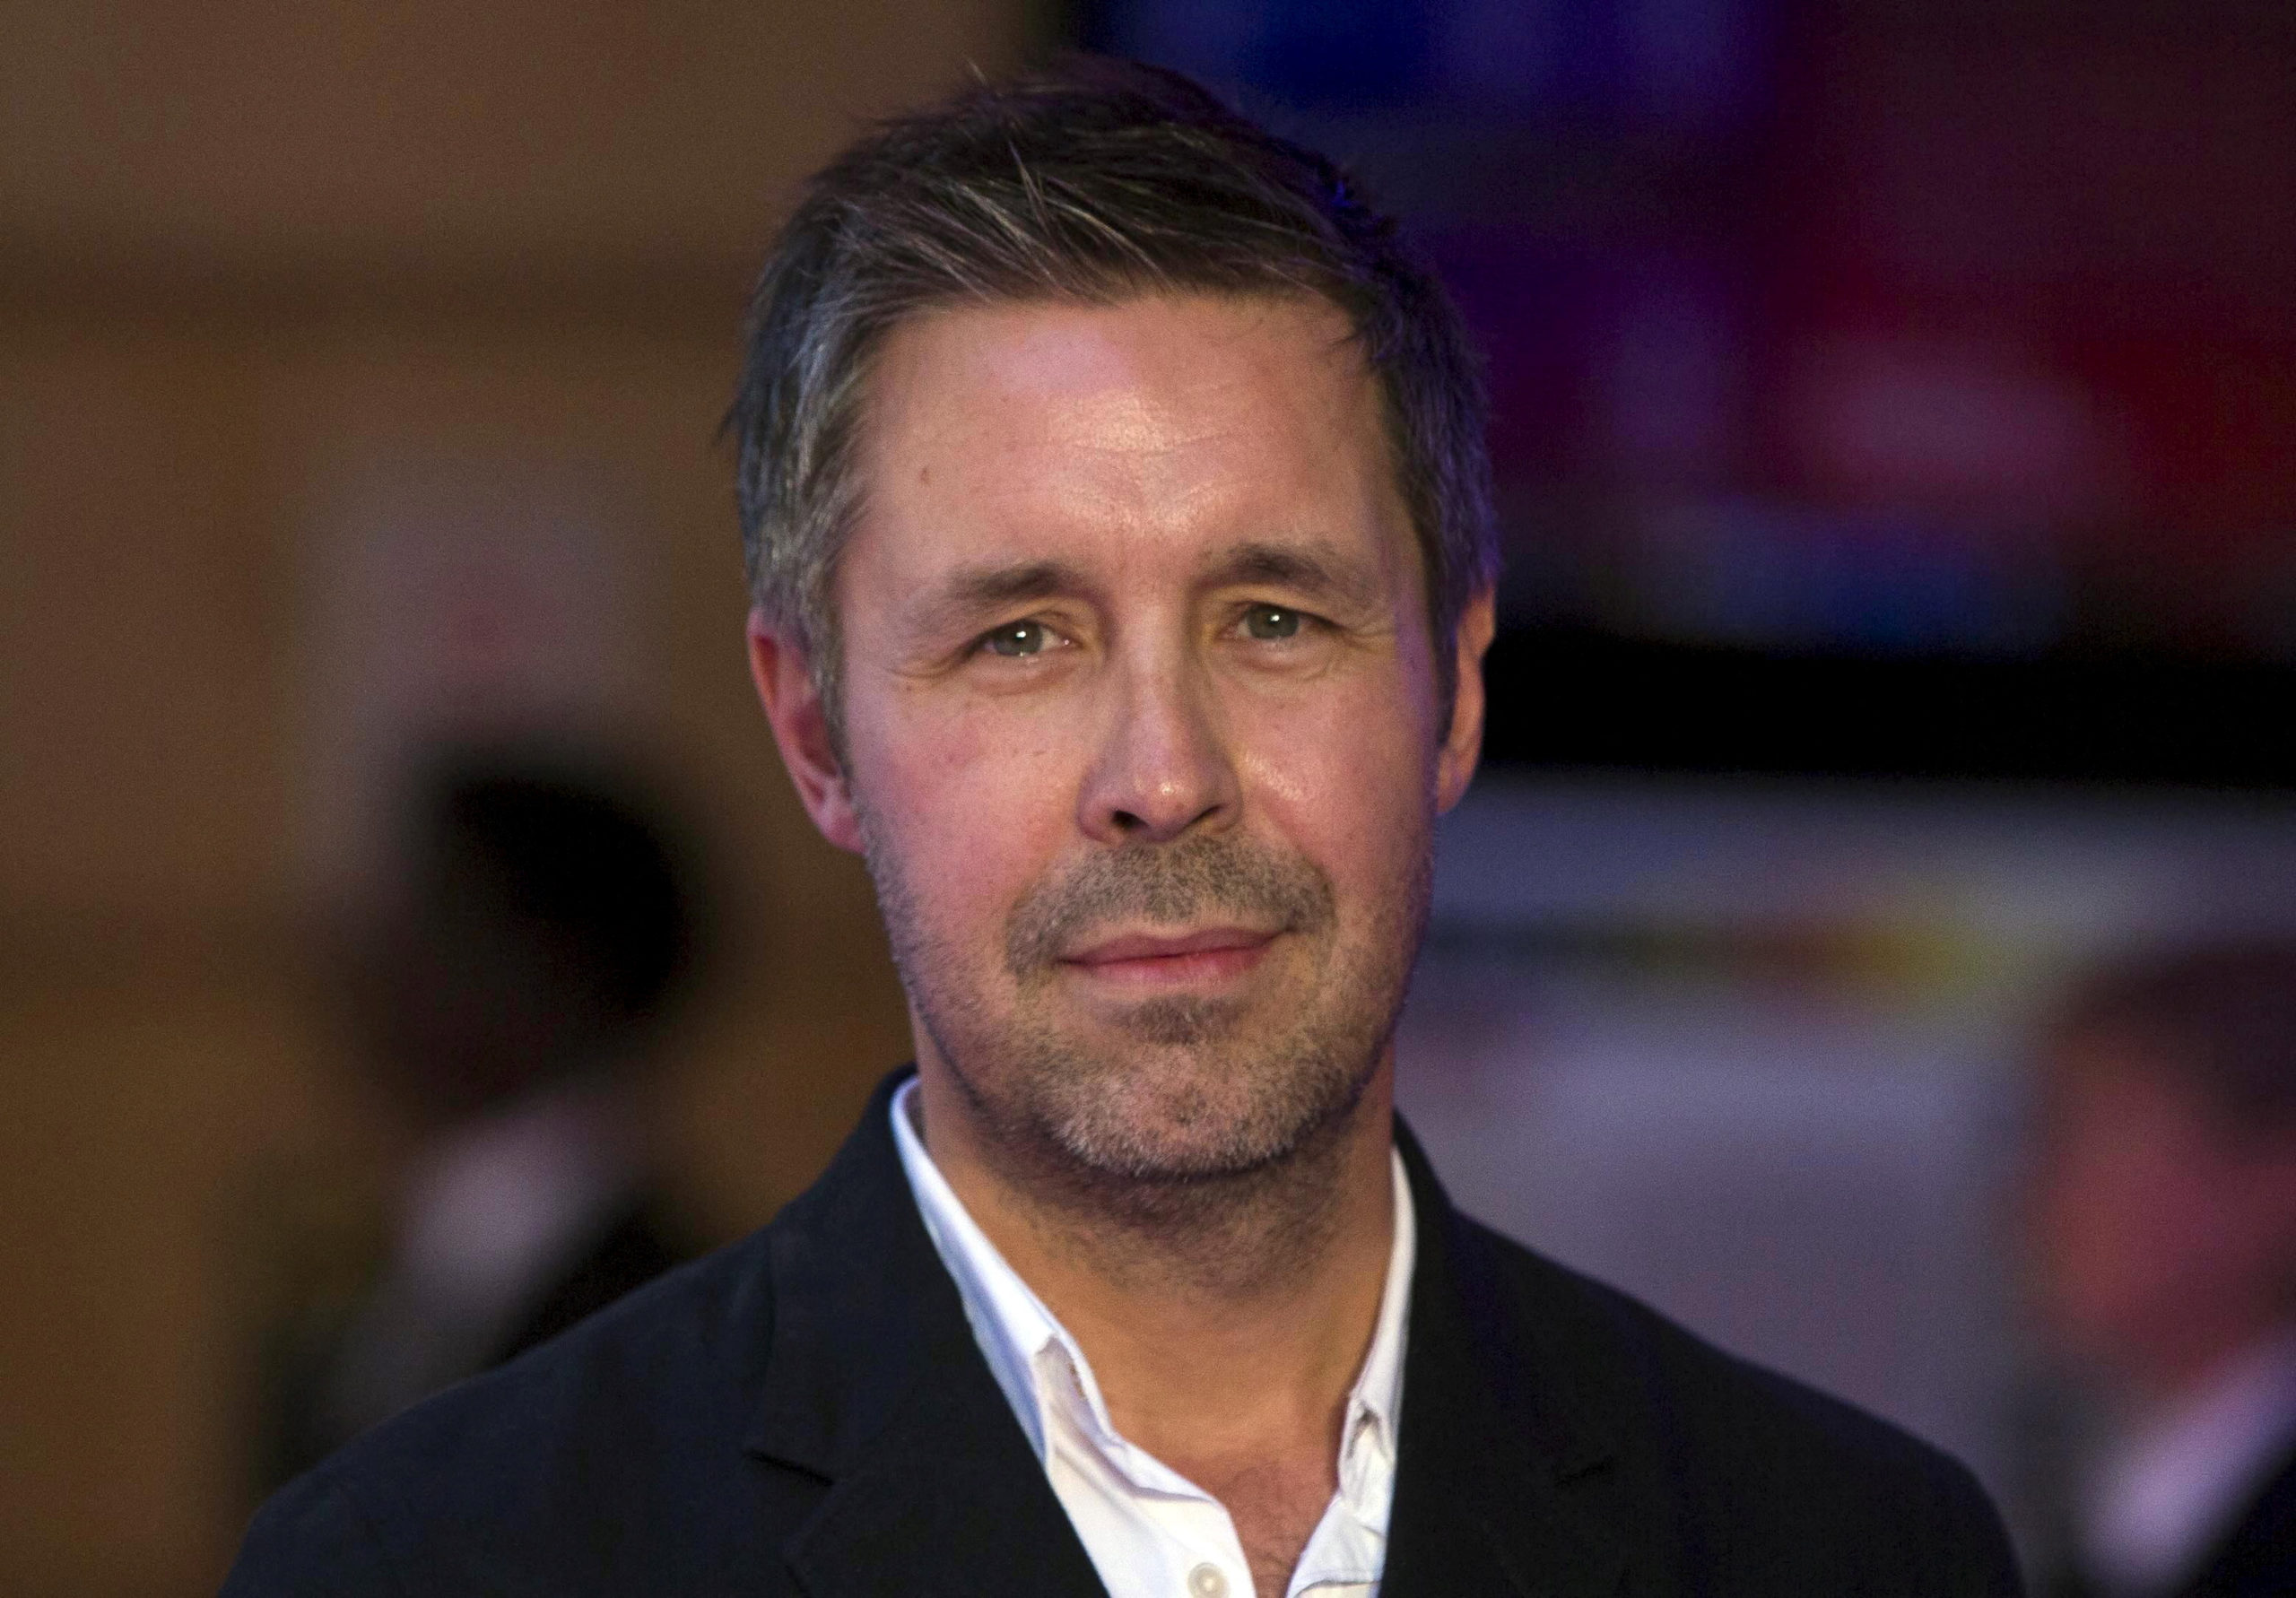 British actor Paddy Considine poses for photographers at the European premiere of the film "Miss You Already" in London September 17, 2015. REUTERS/Neil Hall